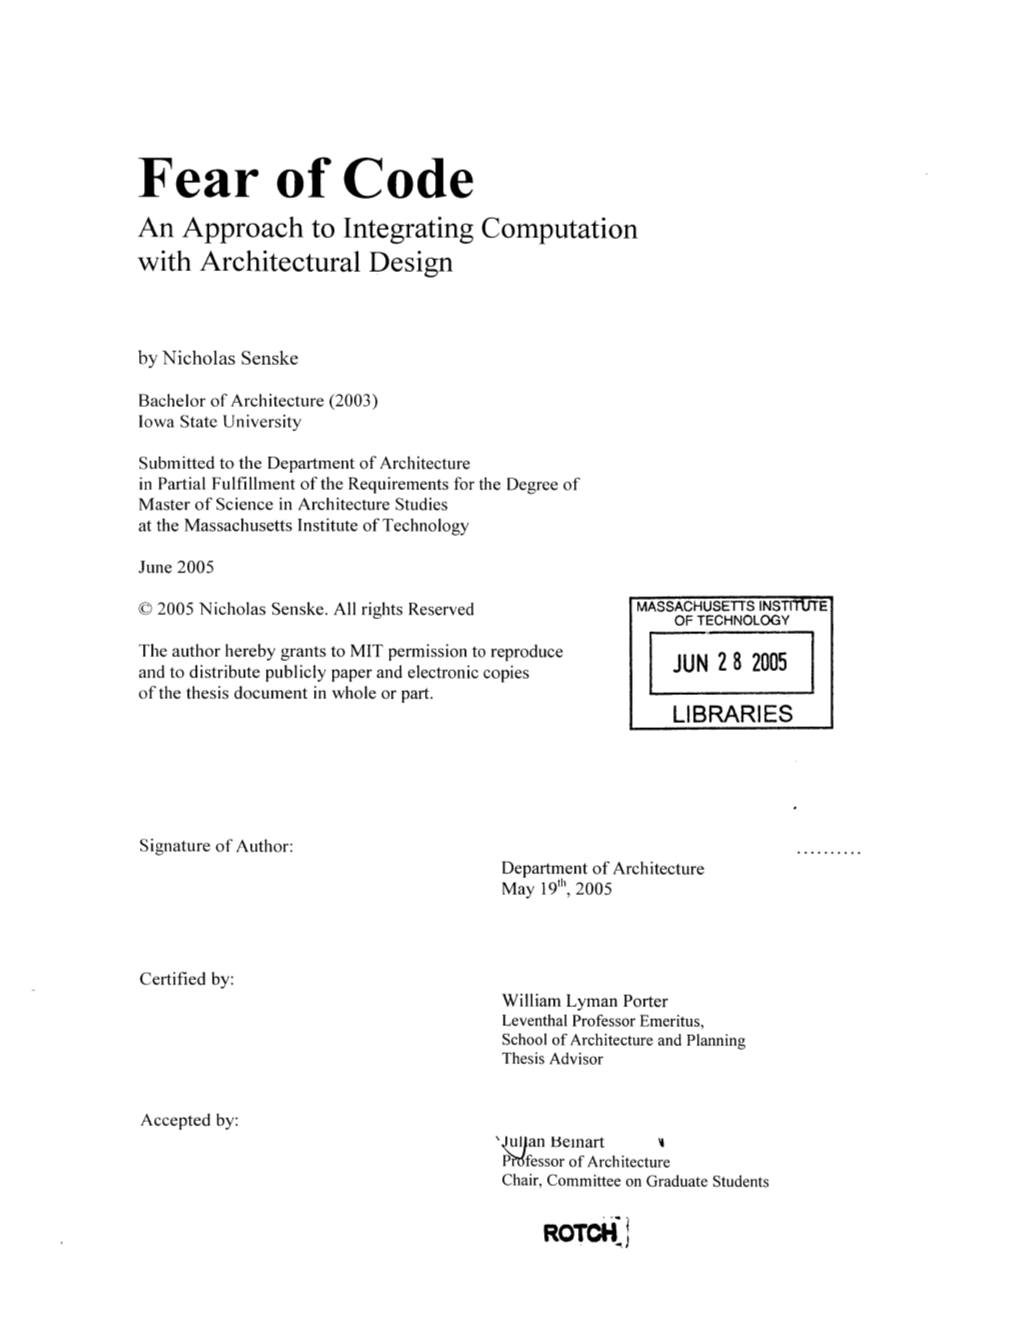 Fear of Code an Approach to Integrating Computation with Architectural Design